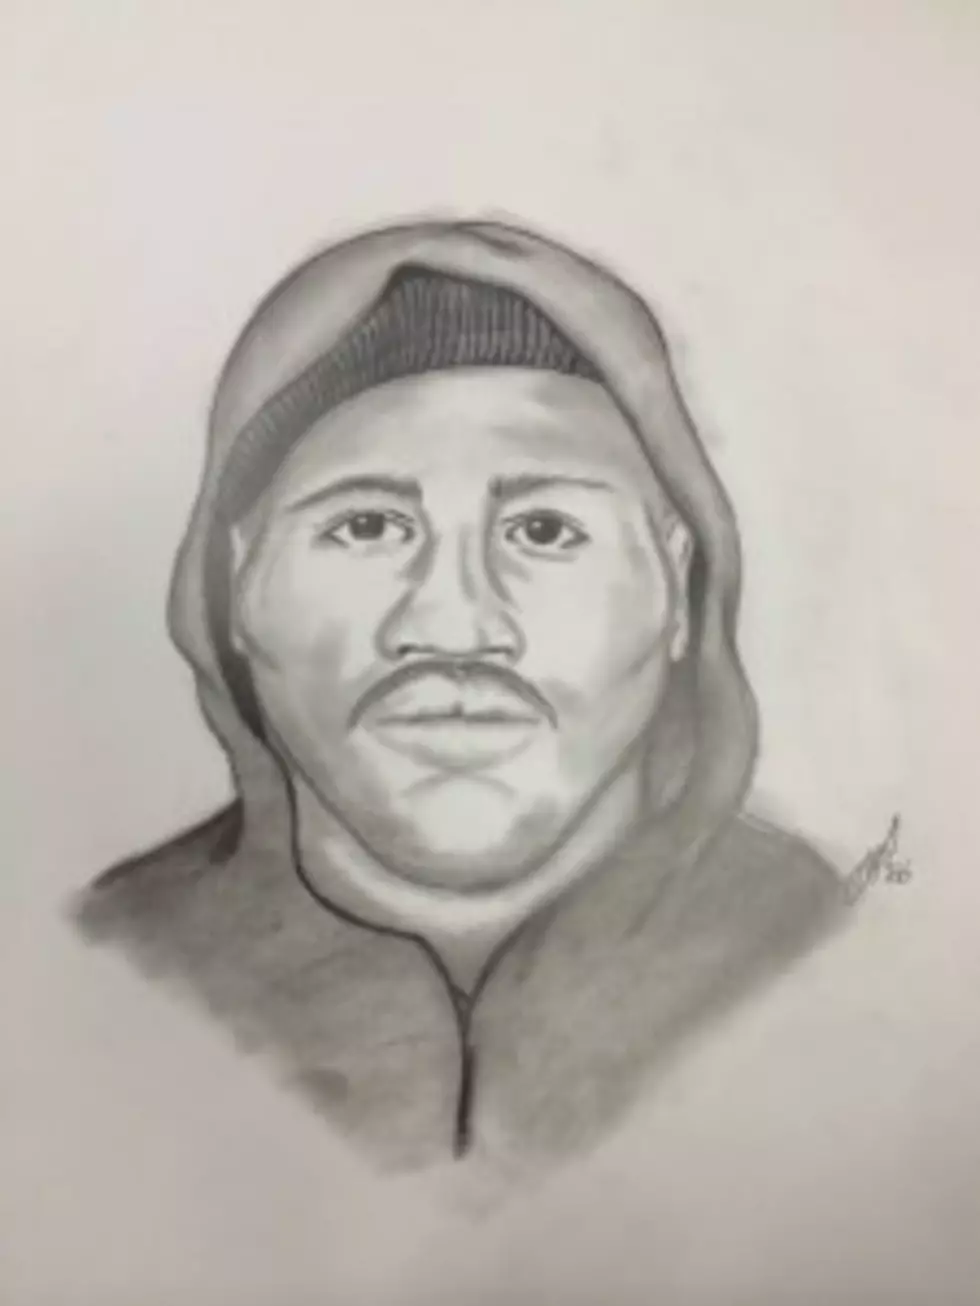 Sketch of 2nd Home Invasion Robbery Suspect Released